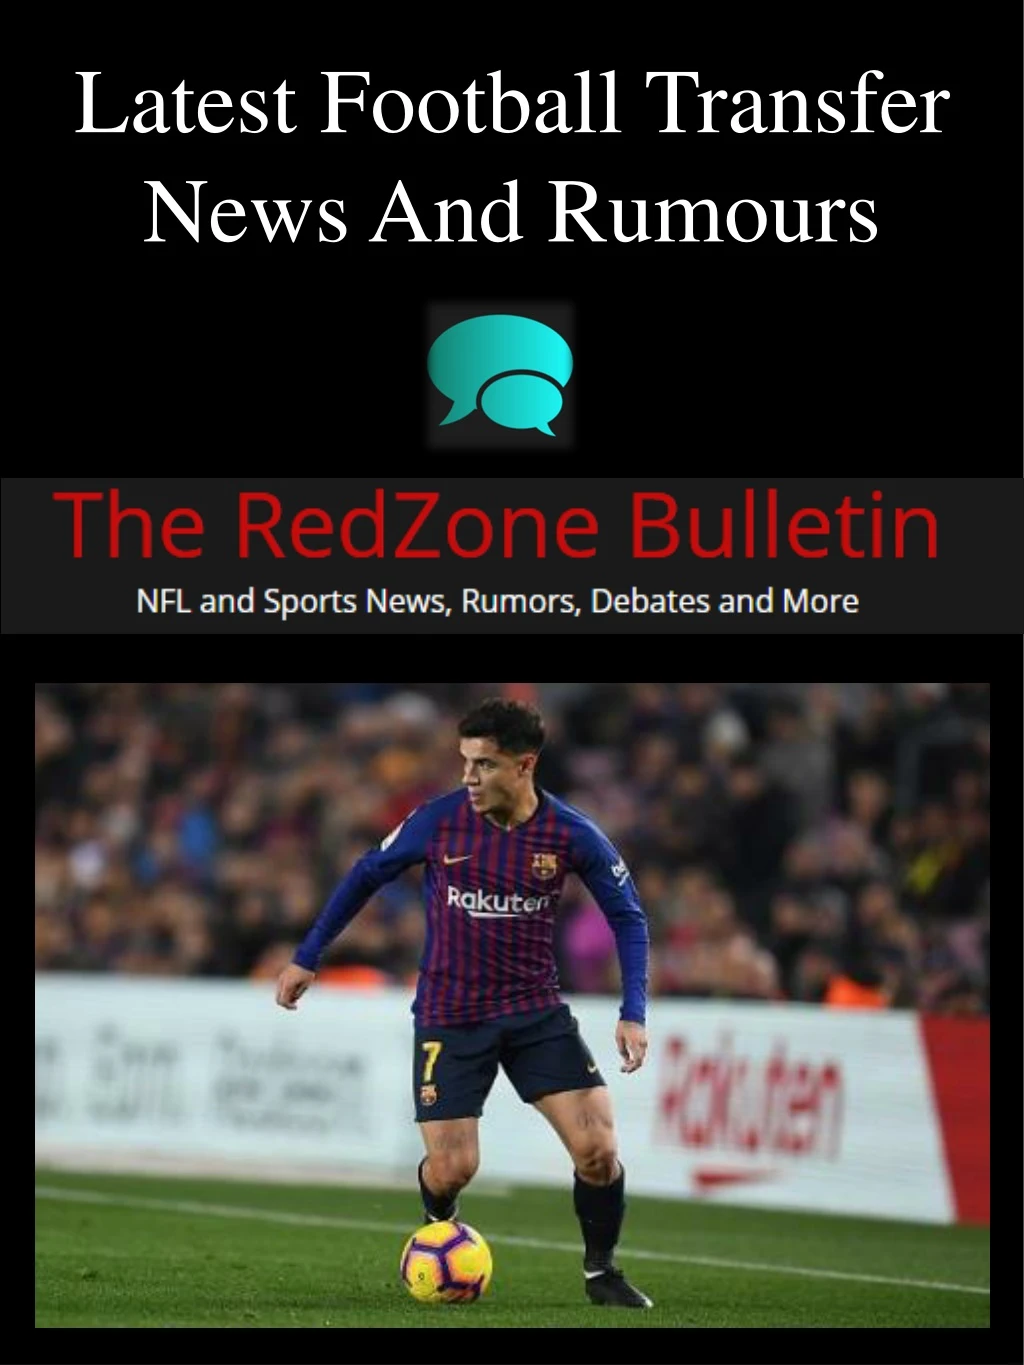 latest football transfer news and rumours